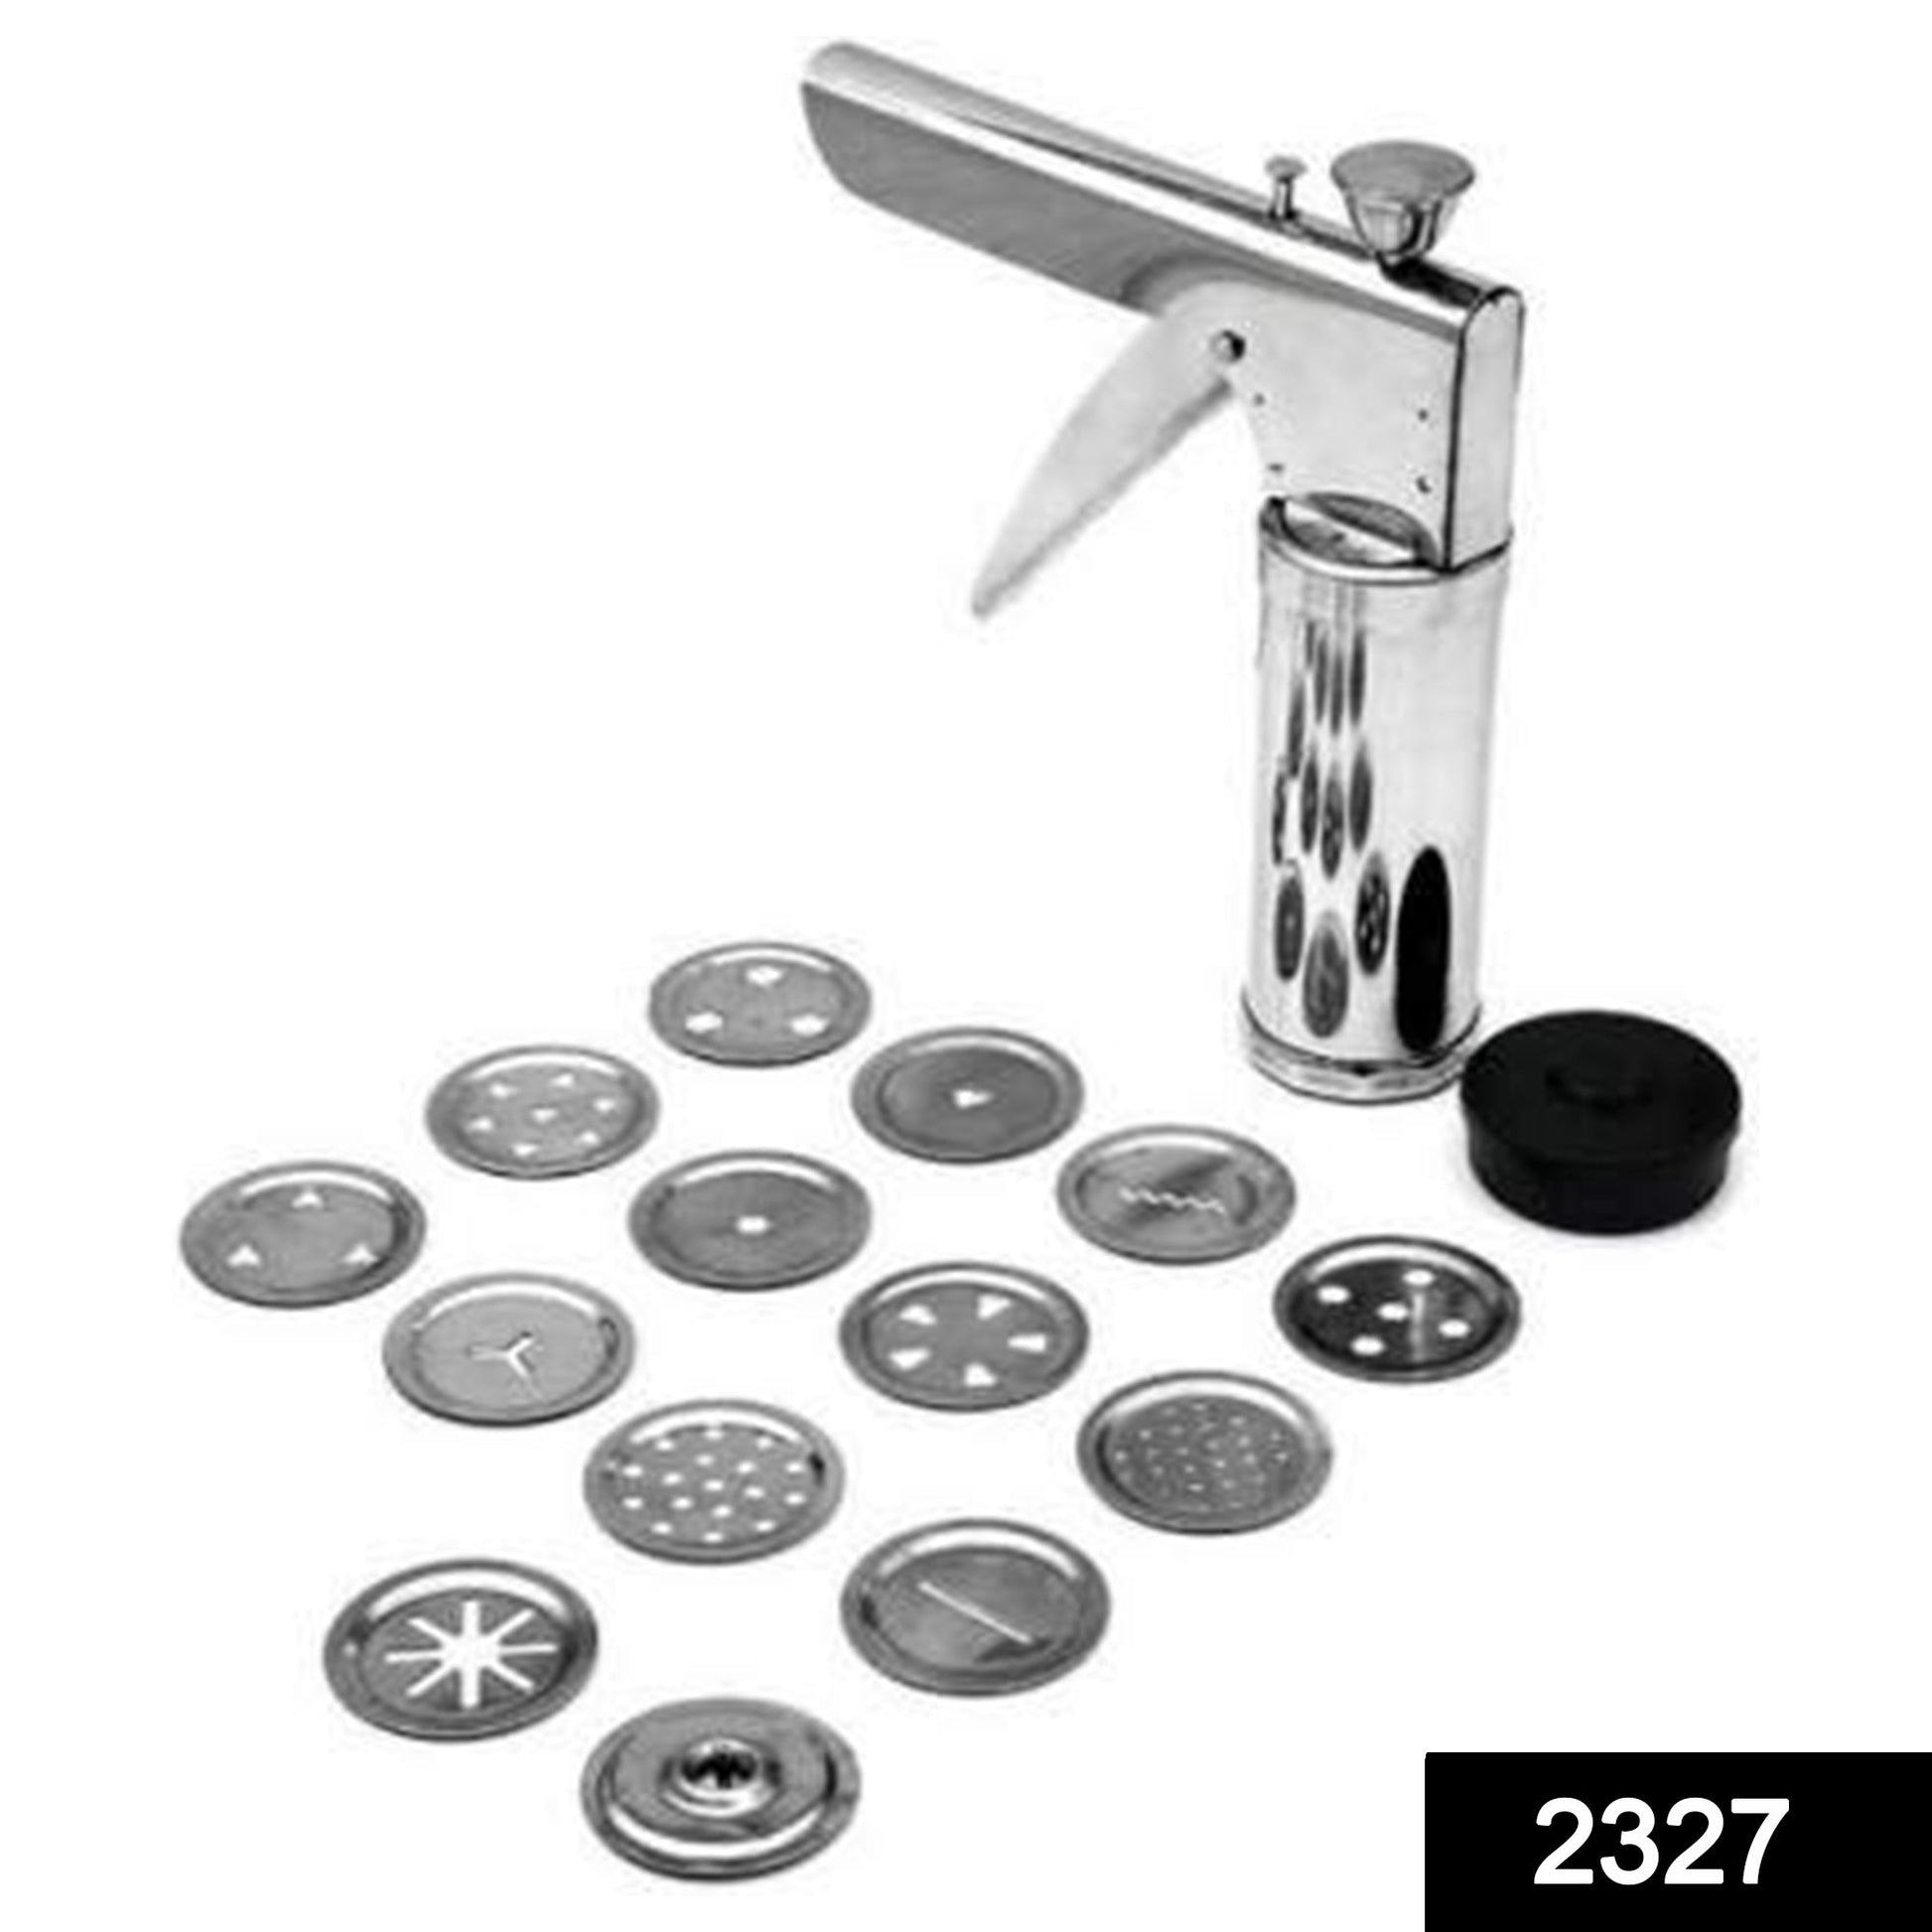 15 in 1 Stainless Steel Kitchen Press with Different Parts